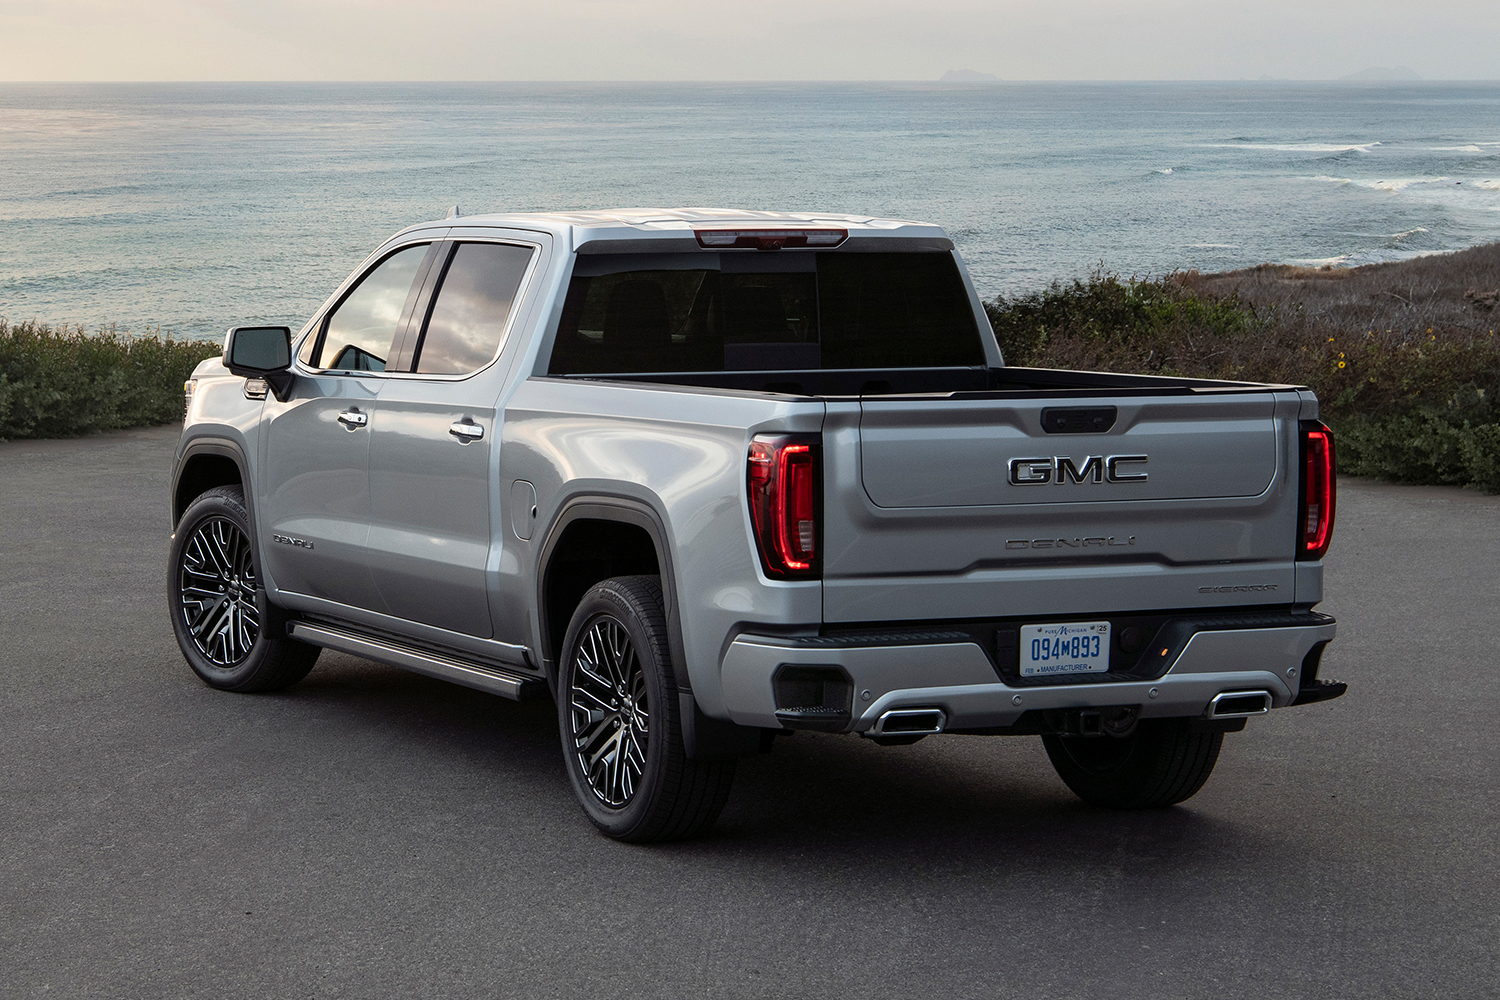 The truck bed of the GMC Sierra Denali Ultimate pickup